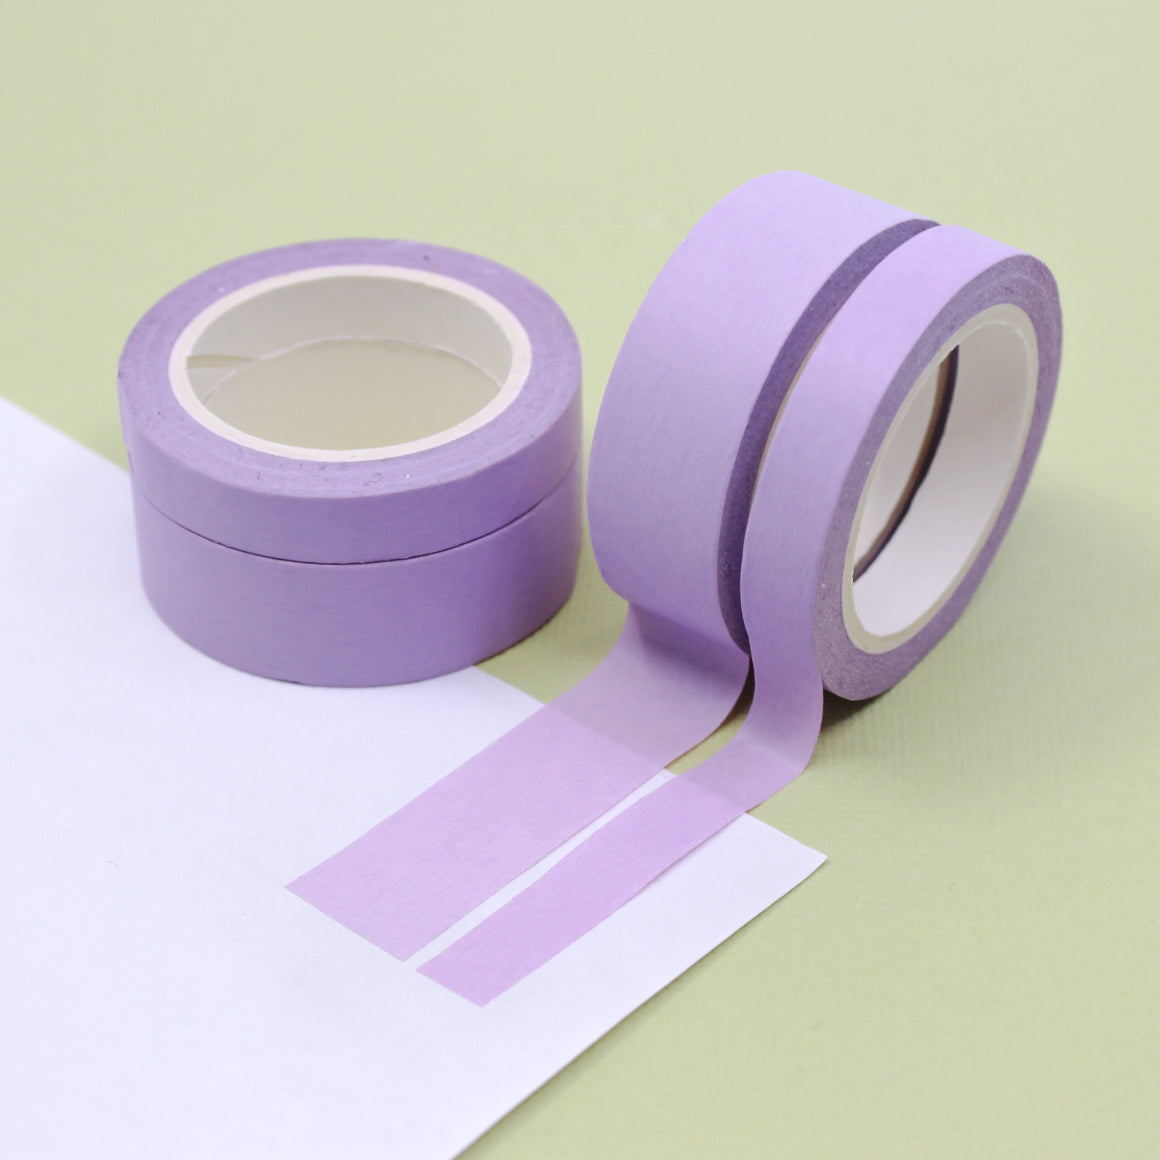 This pastel lavender purple washi tape is vibrant and fun. This washi tape is part of our solid neon thick-thin matching duo washi collection. Find the perfect color for any project in BBB Supplies' thick-thin solids collection, from neon to neutral to pastel and more. This tape is sold at BBB Supplies Craft Shop.